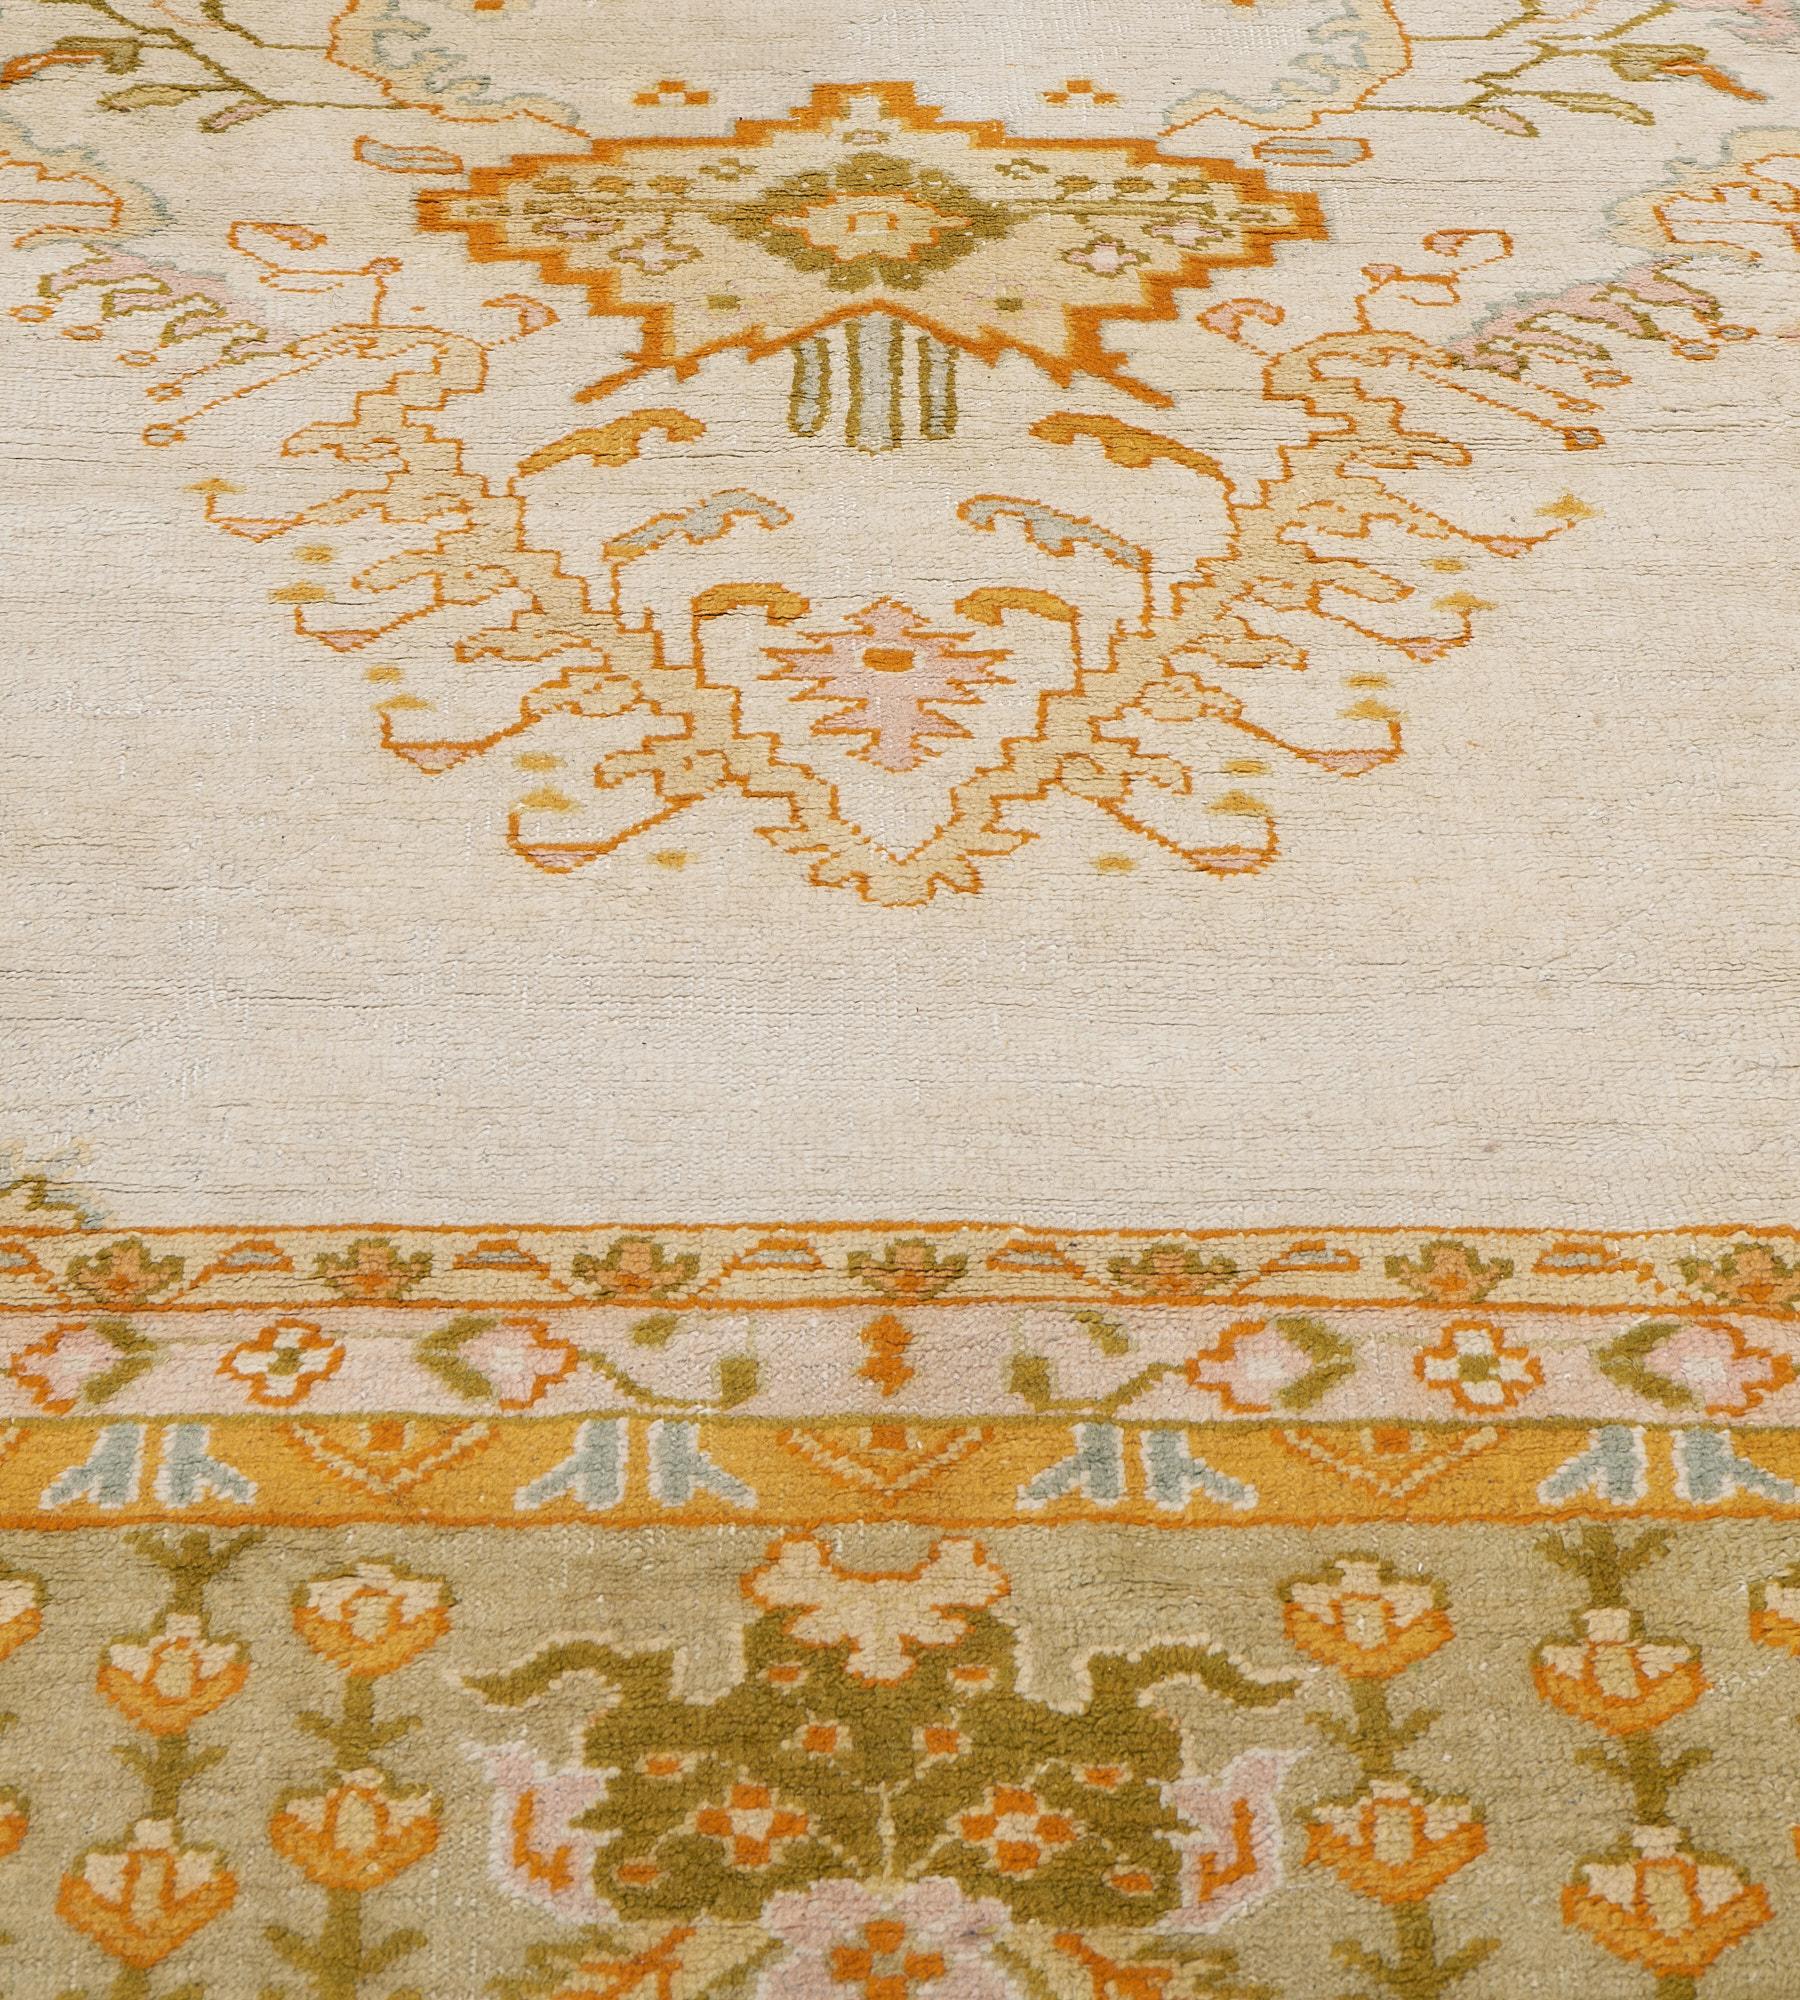 This antique Oushak rug features an ivory field with a central lozenge medallion containing a central dusty-pink and sandy-yellow floral lozenge issuing a variety of floral stems surrounded by a band of delicate floral vine with a bold burnt-orange